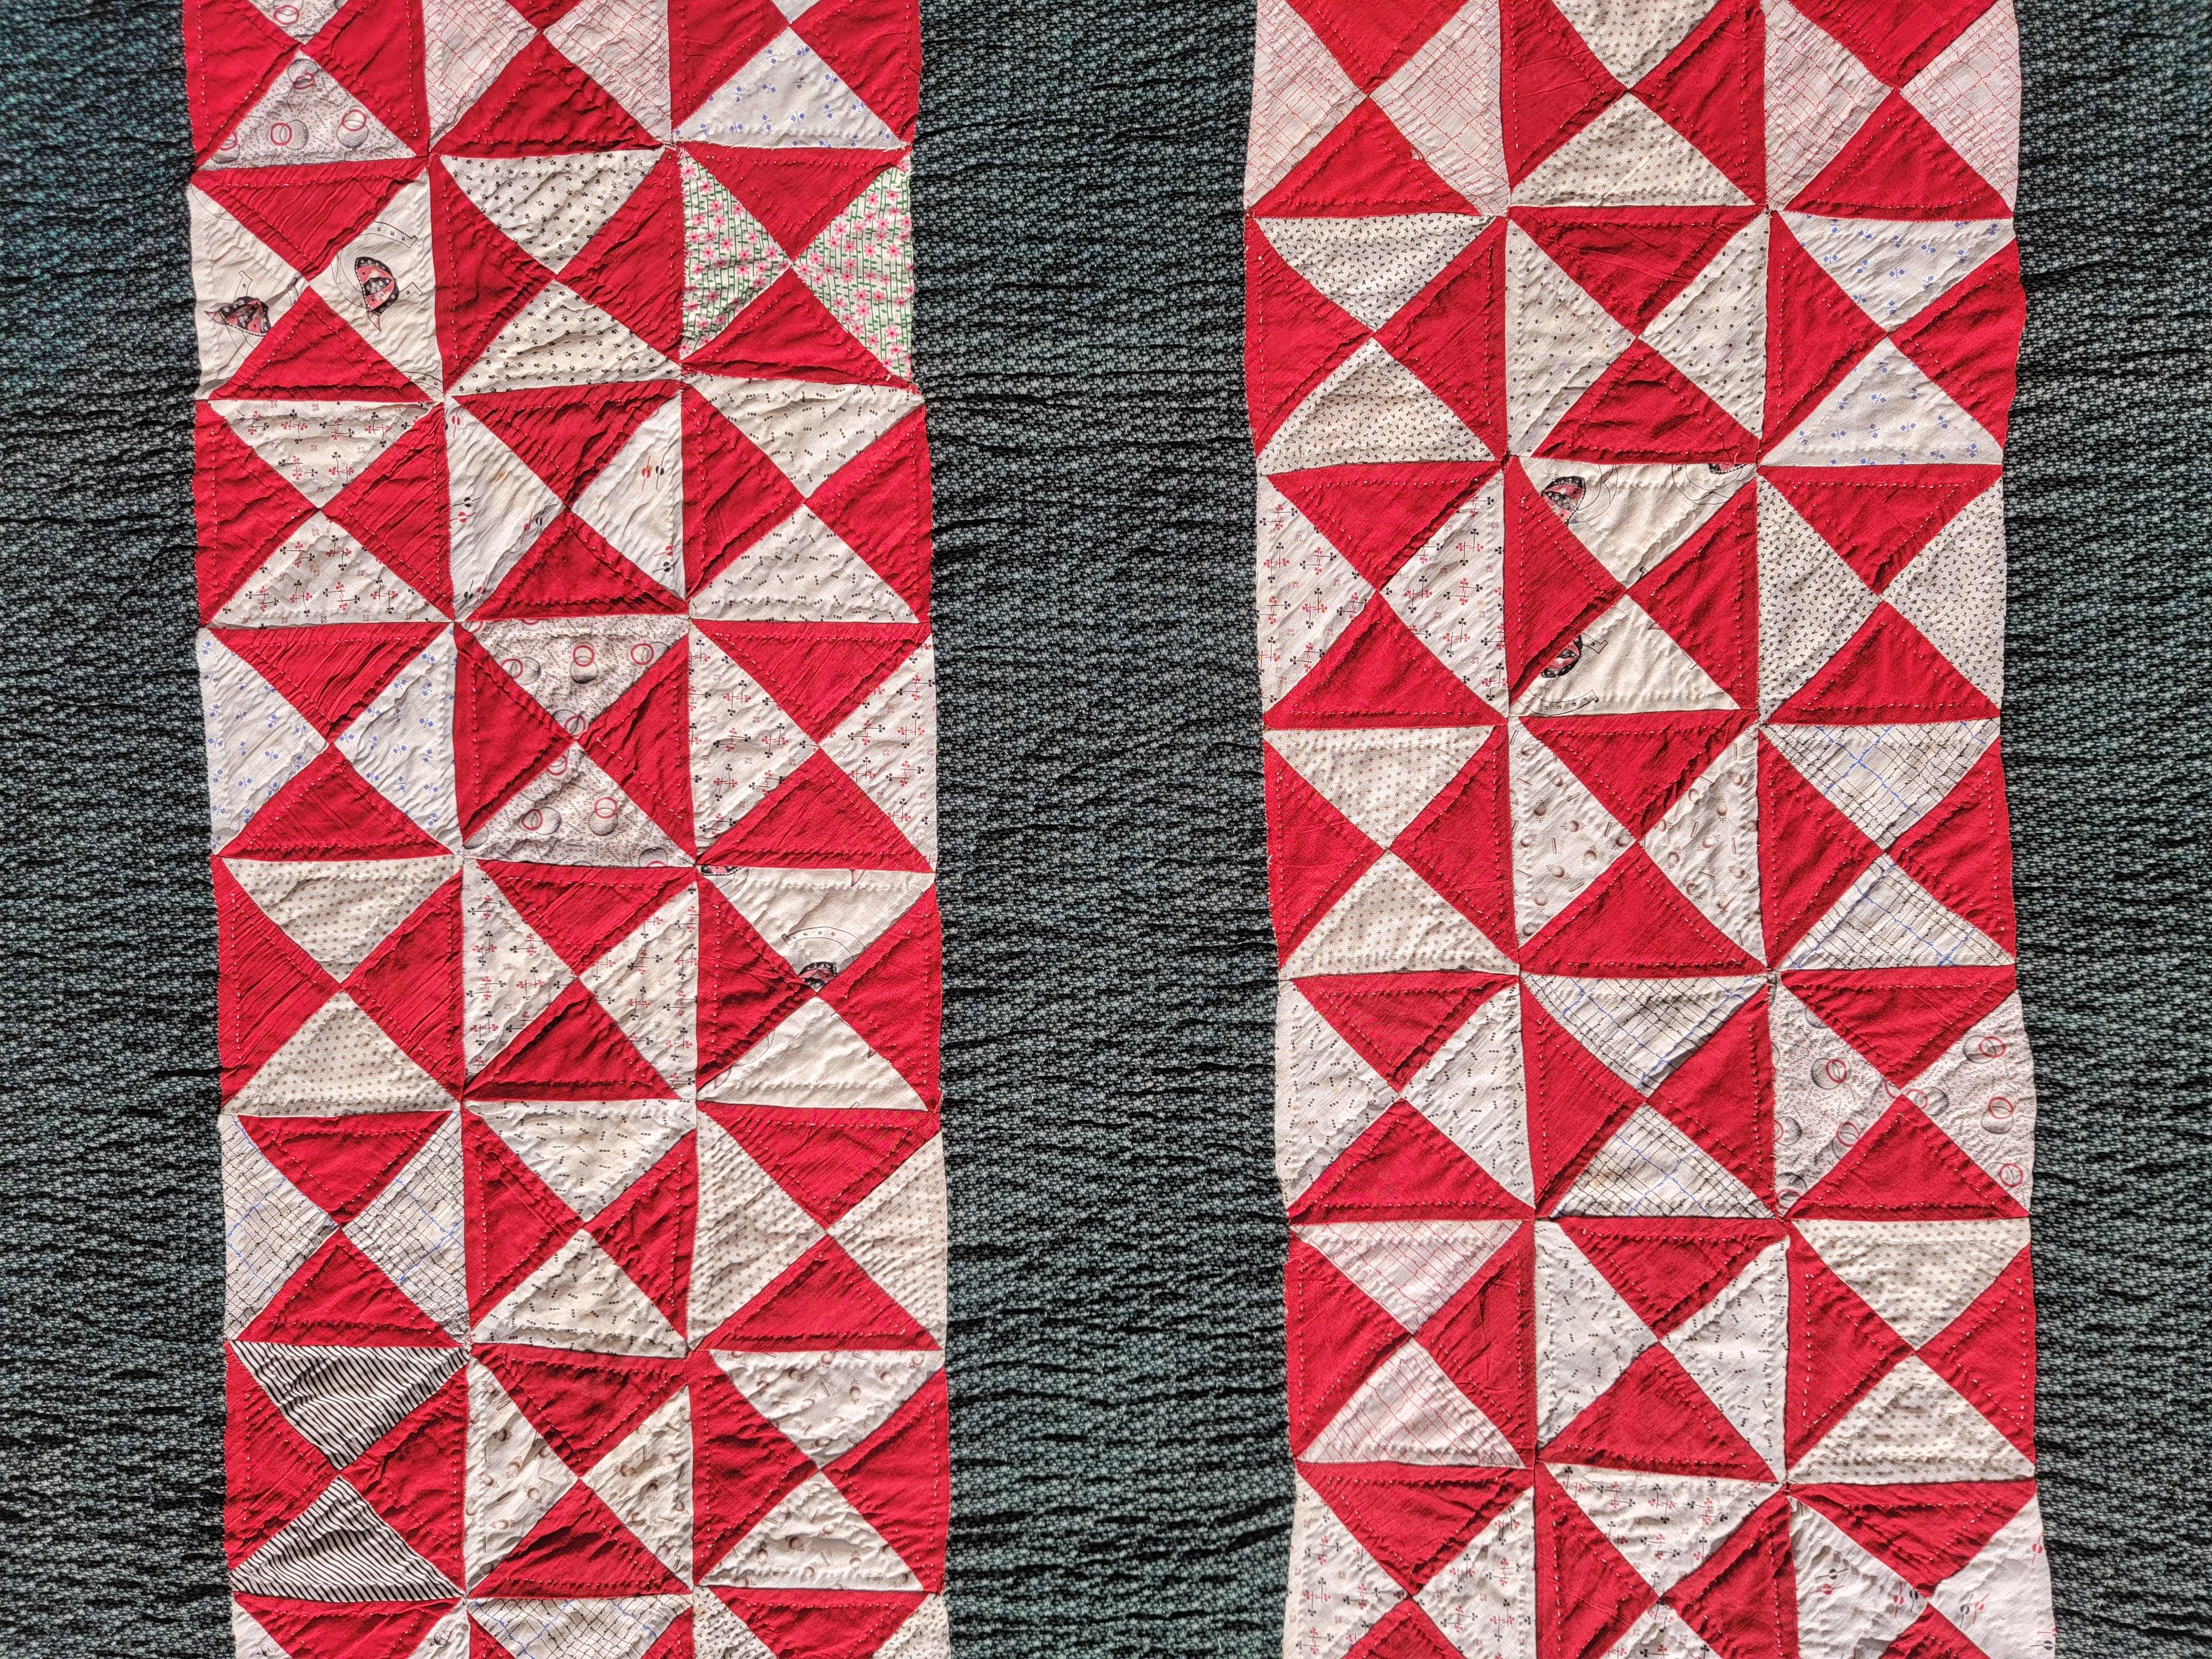 Hand-Crafted 19thc Mini Pieced Bars Quilts For Sale